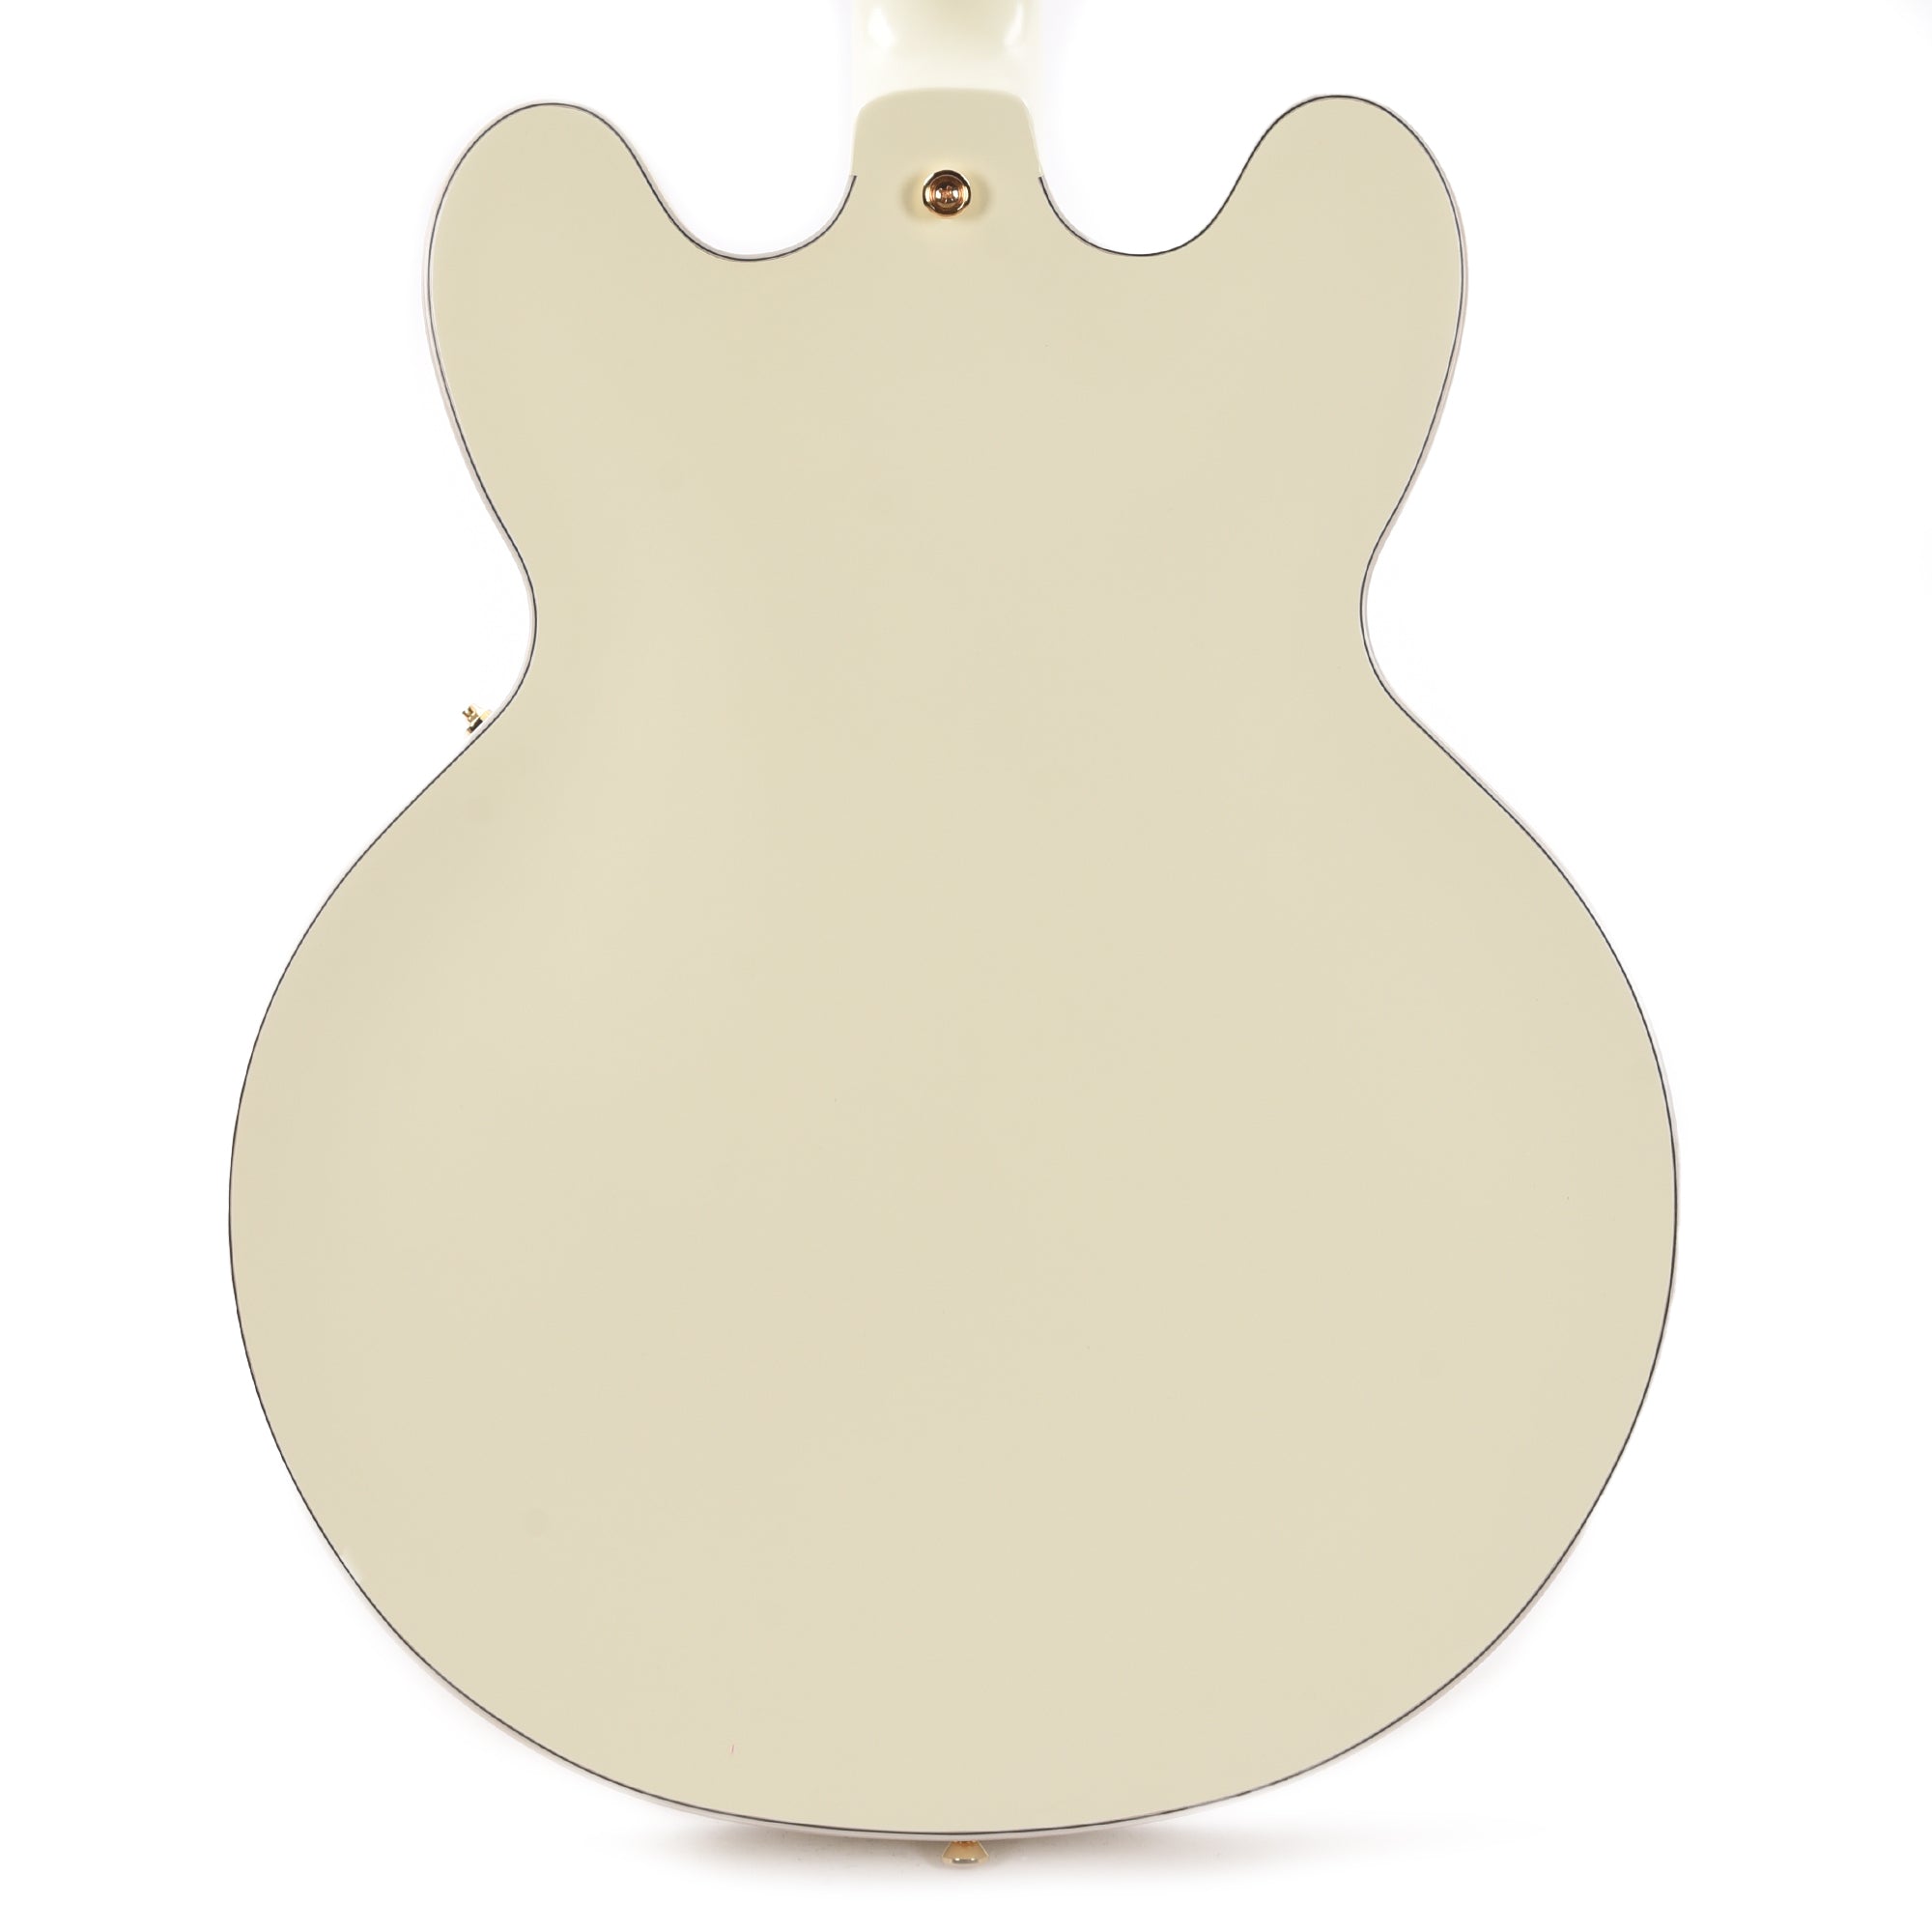 Epiphone Inspired by Gibson Custom 1959 ES-355 Classic White